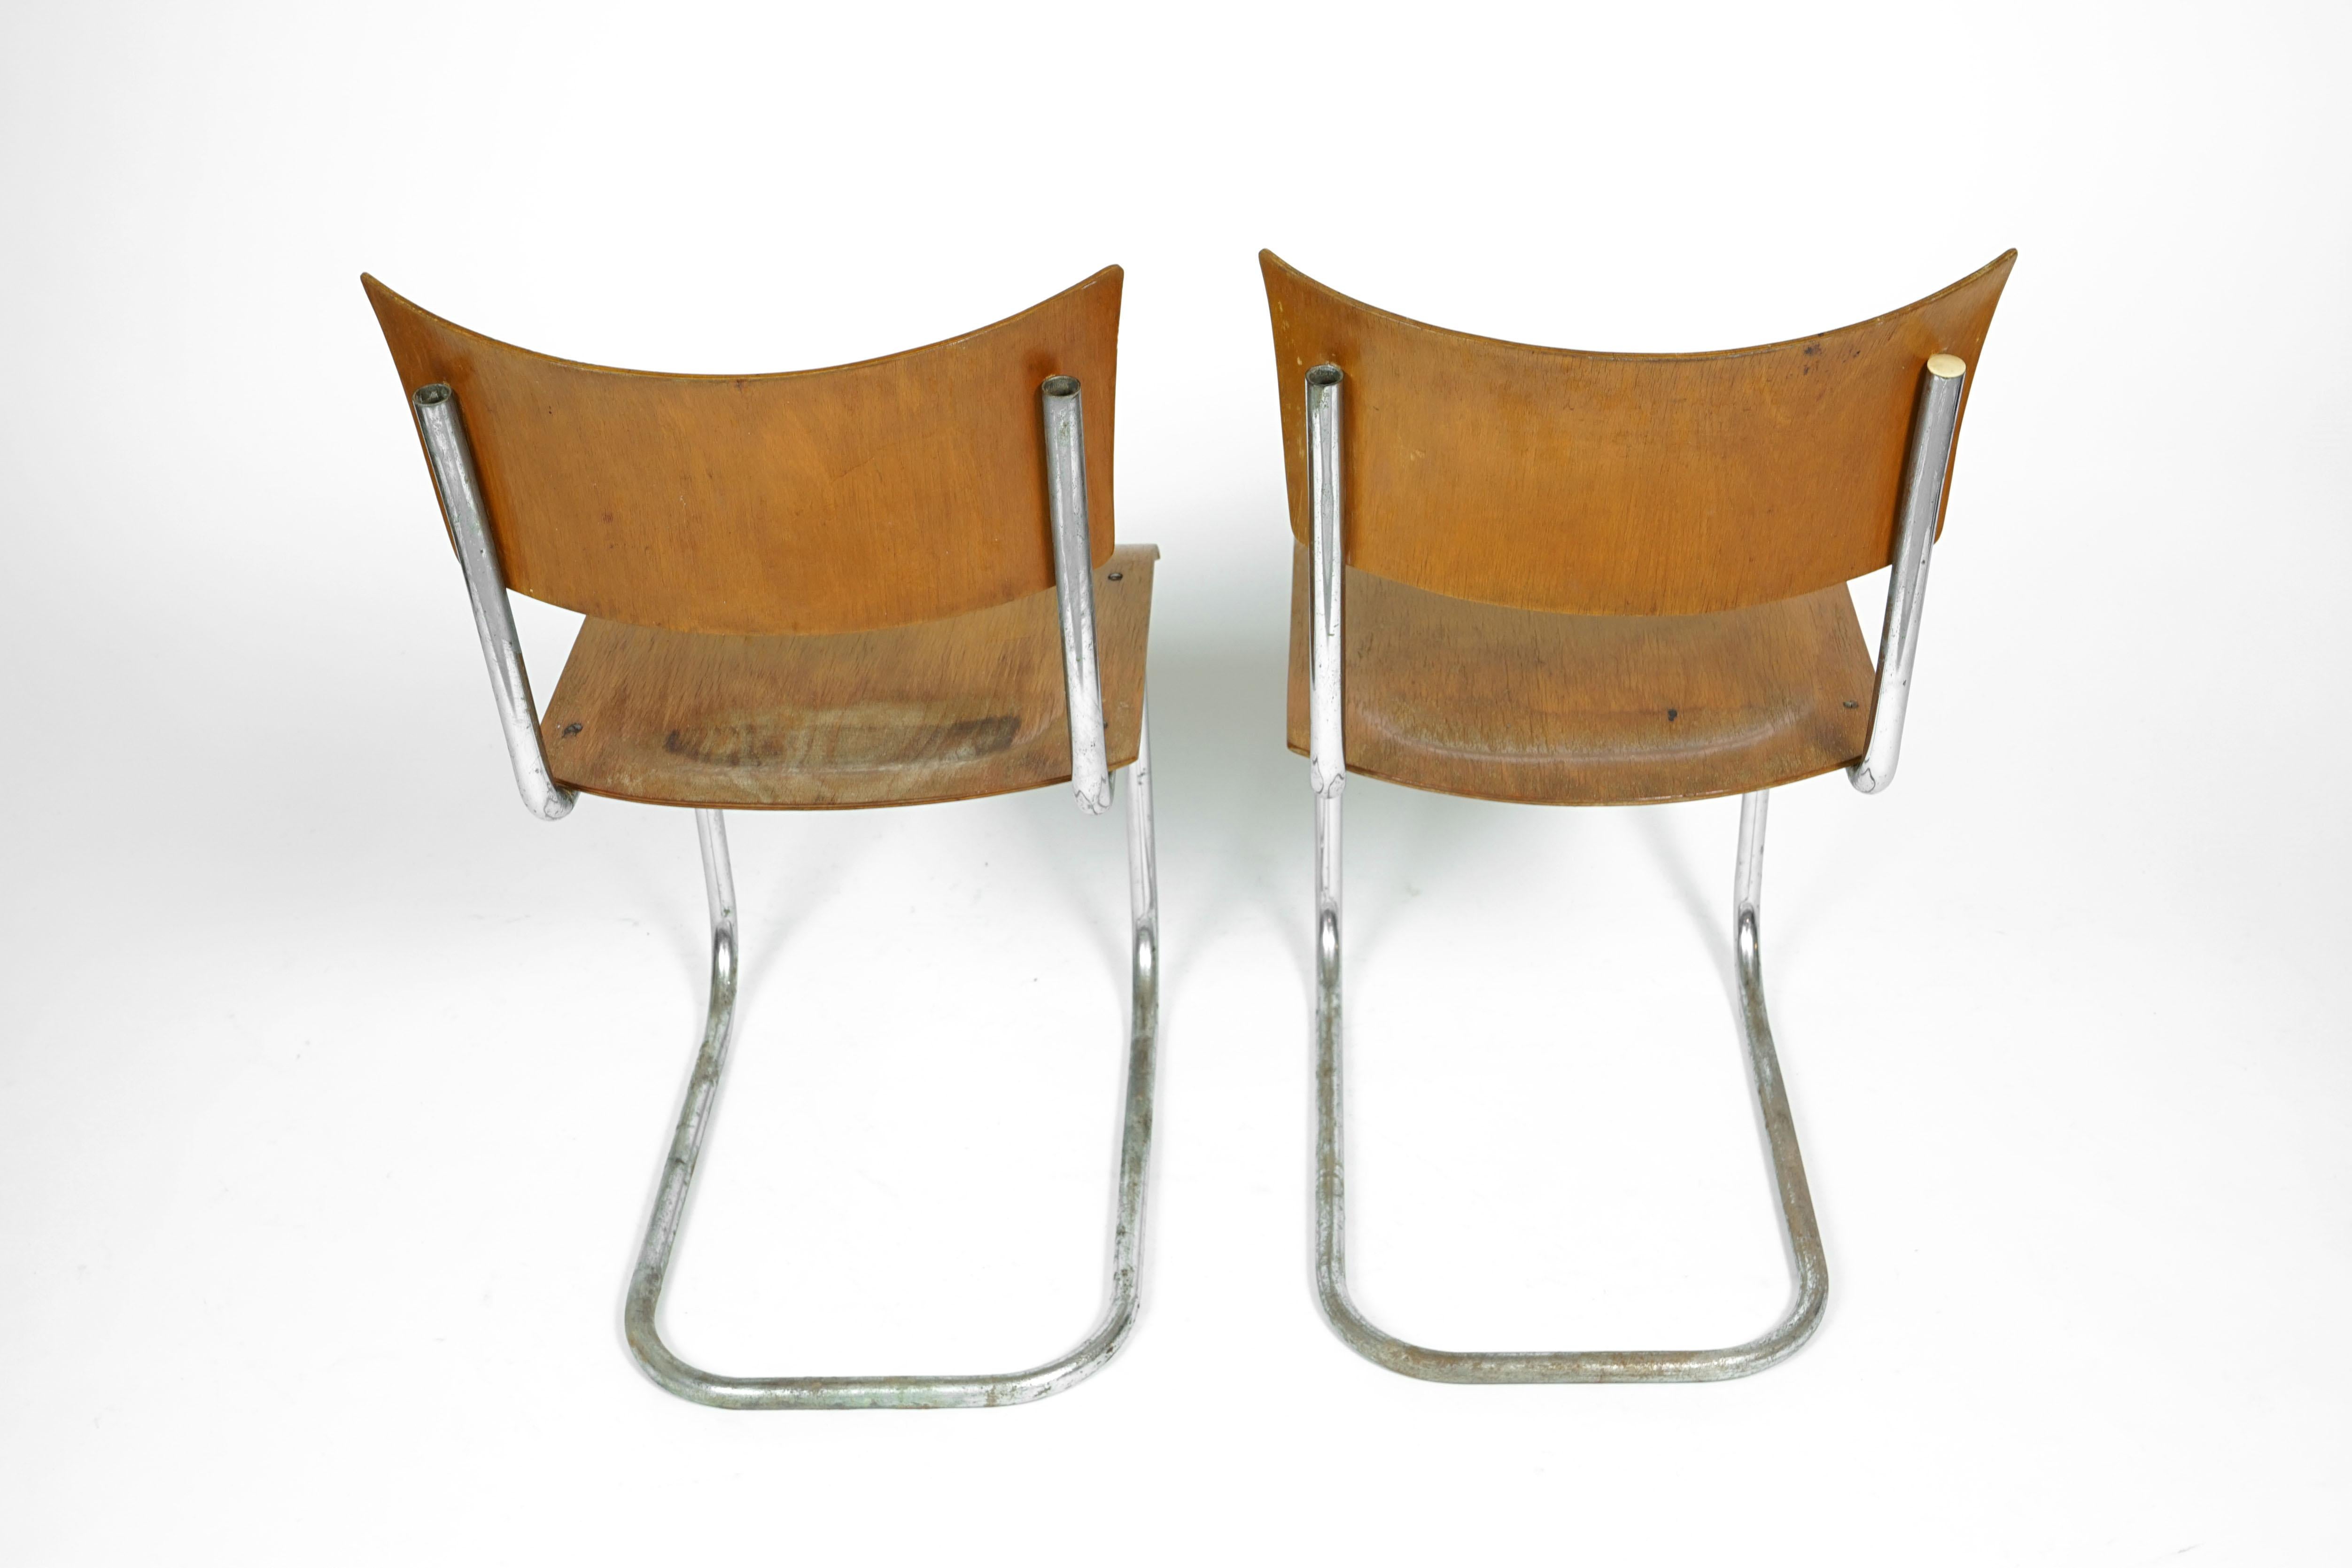 European Plywood Cantilever Tubular Chairs Mart Stam, 1920s For Sale